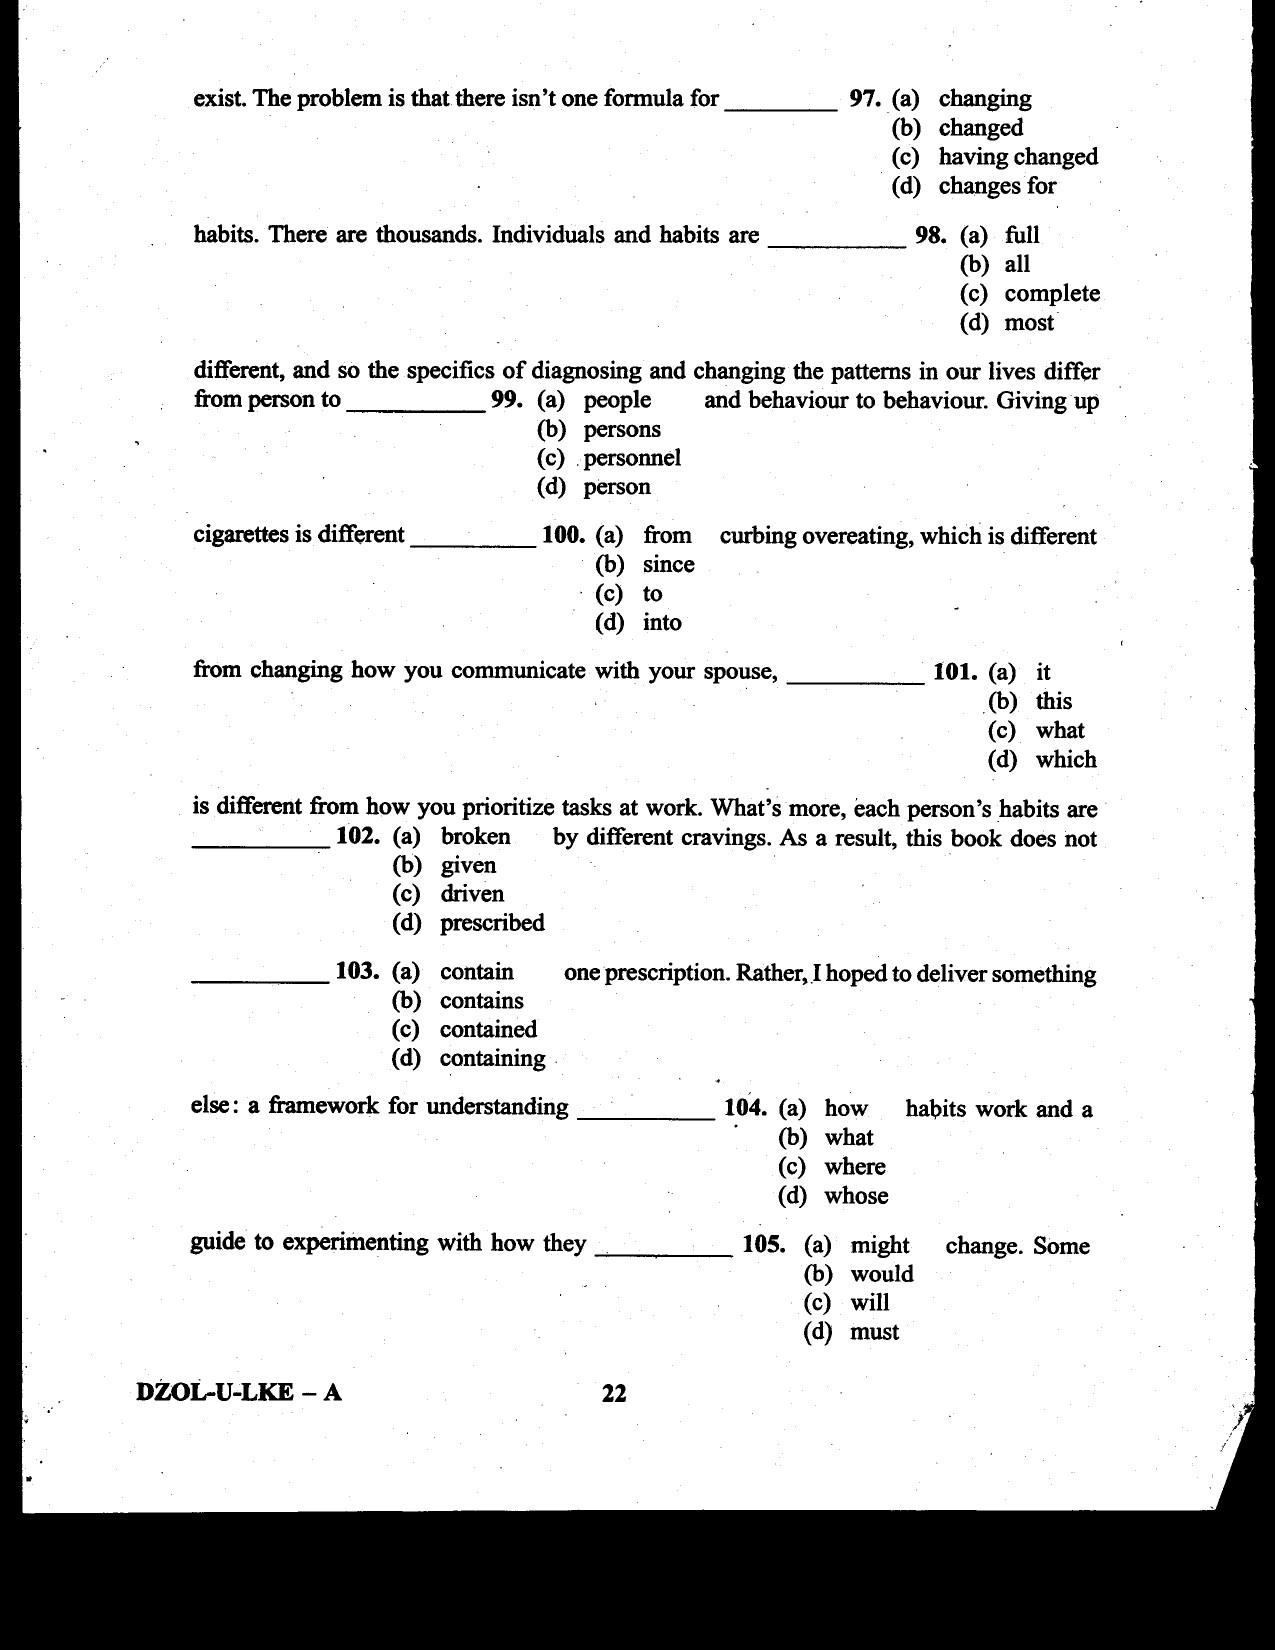 CDS II Examination 2020 English Question Paper - Image 22